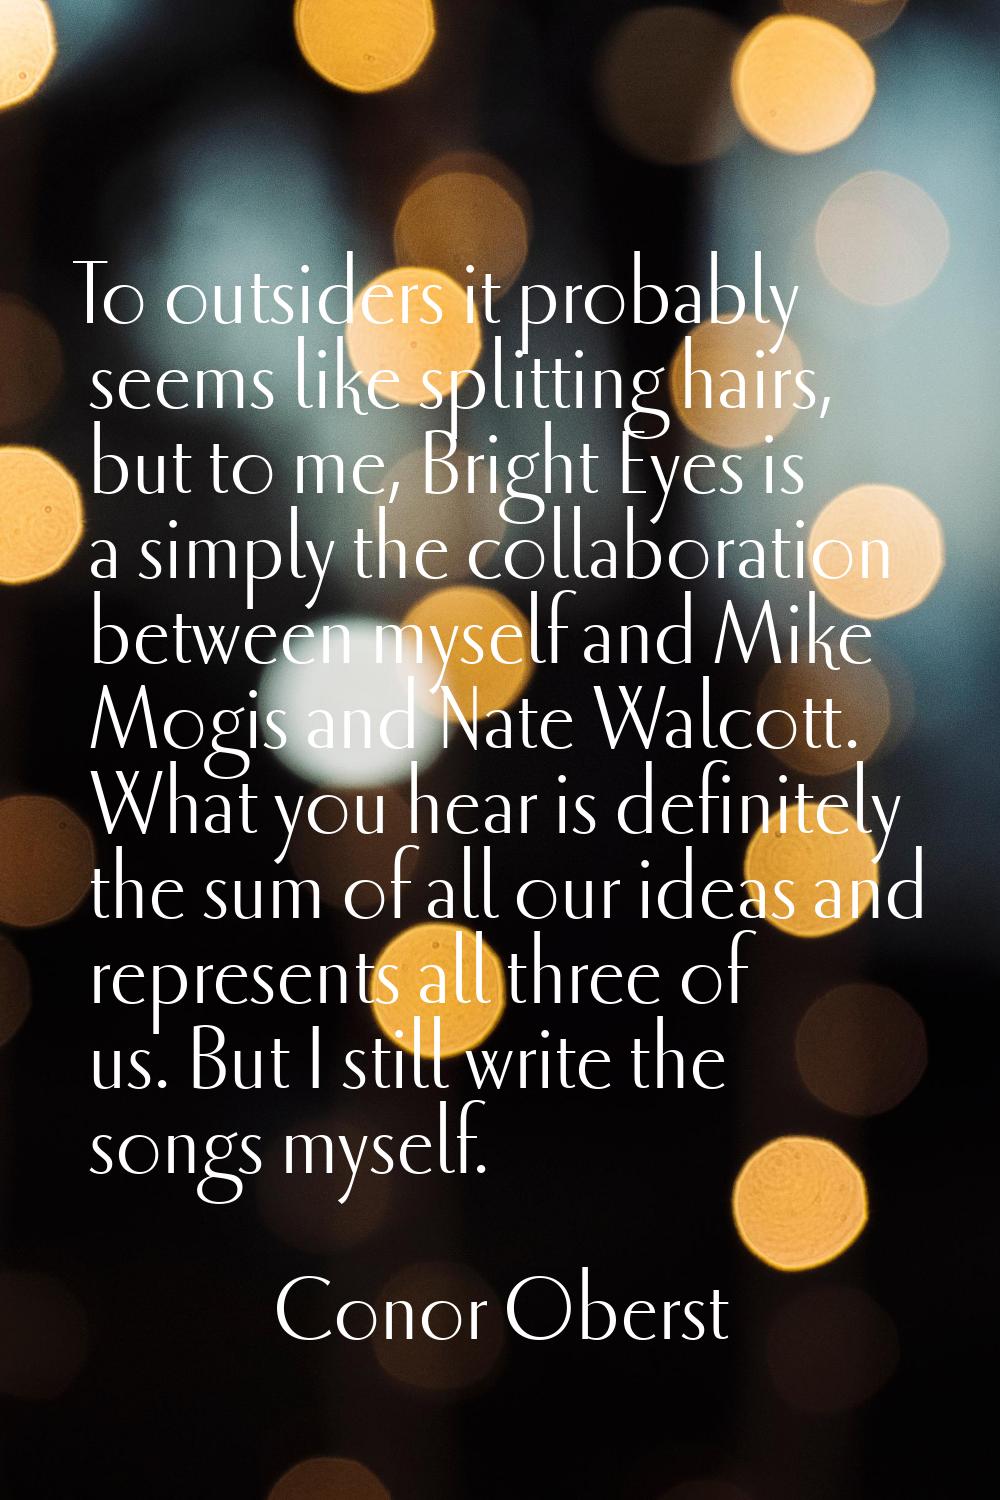 To outsiders it probably seems like splitting hairs, but to me, Bright Eyes is a simply the collabo